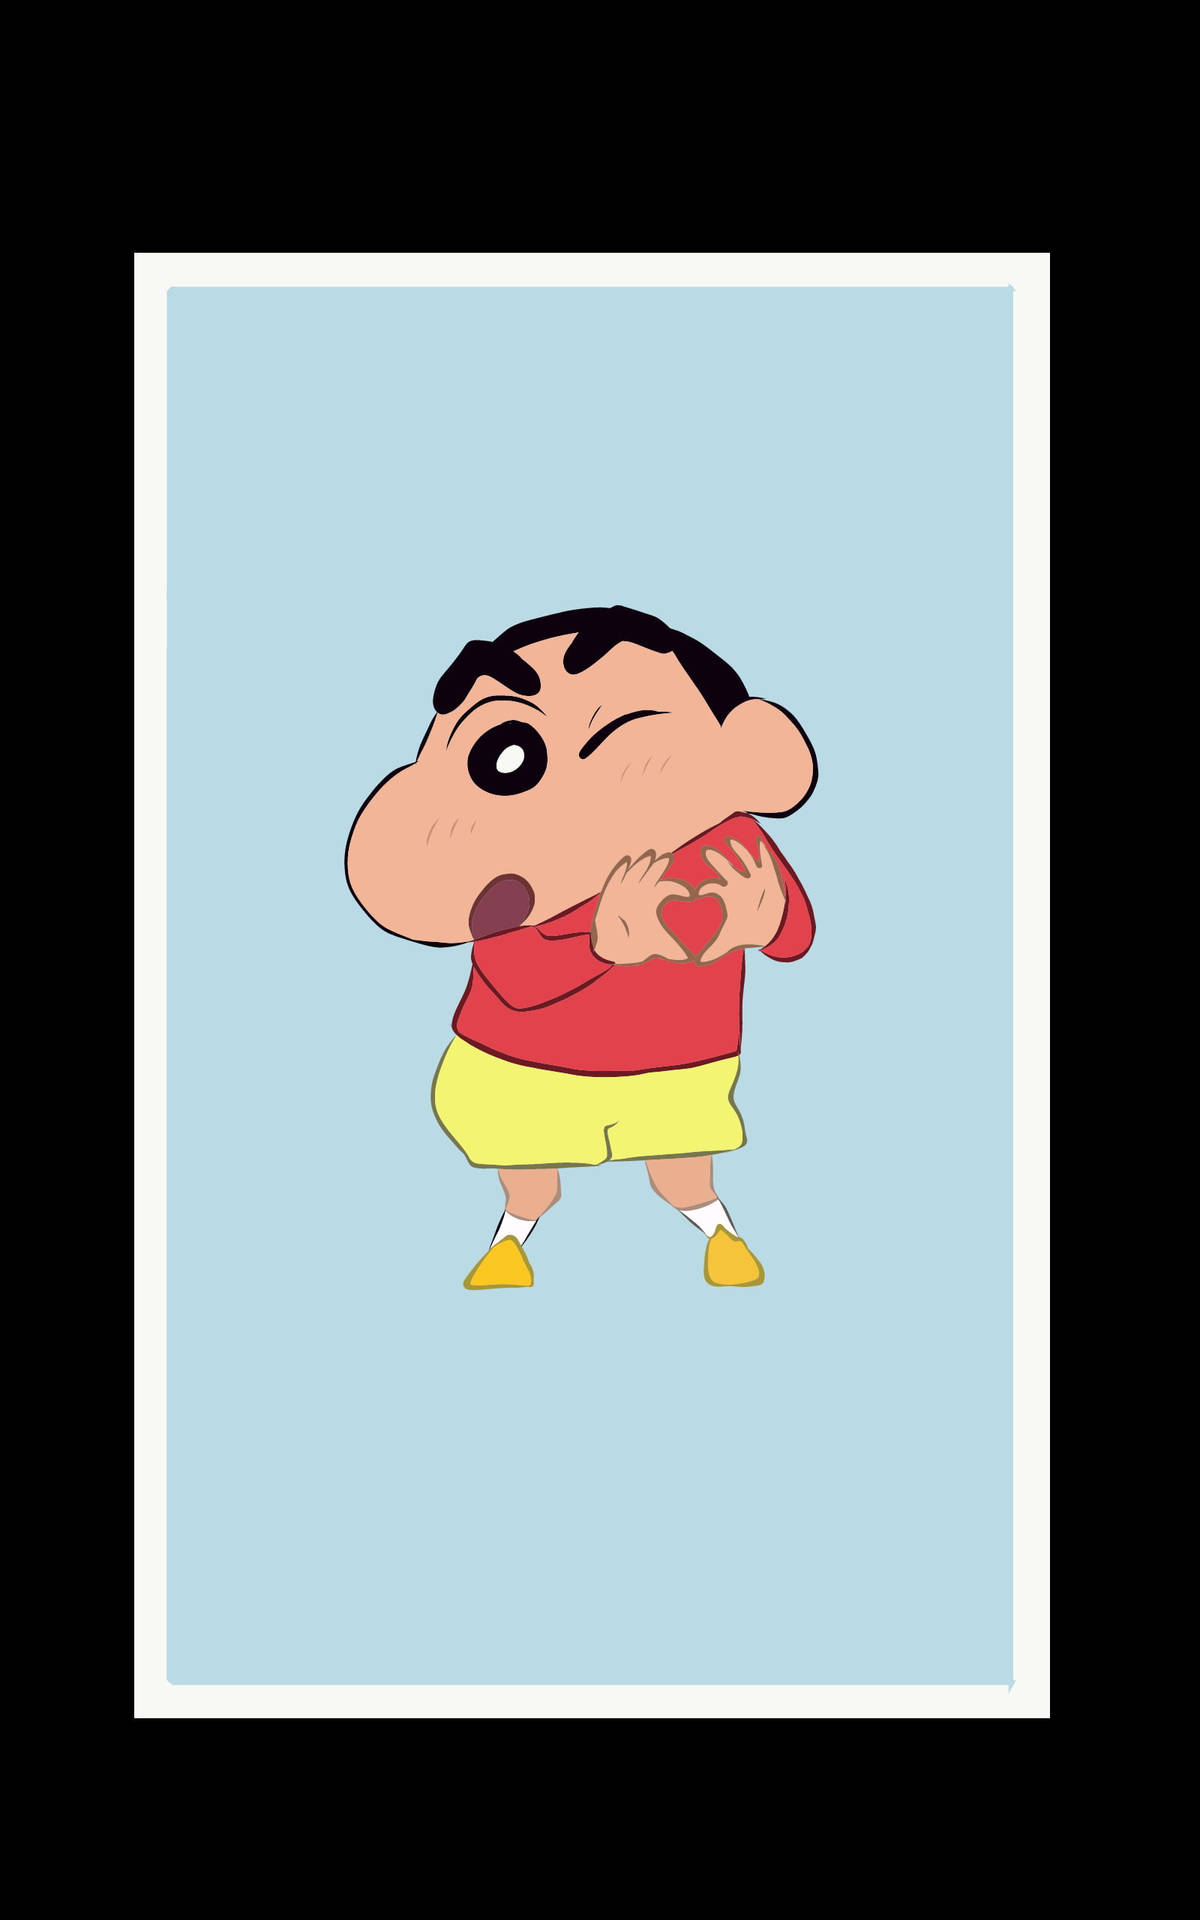 Finest Aesthetics Of Shinchan With Heart Sign Background